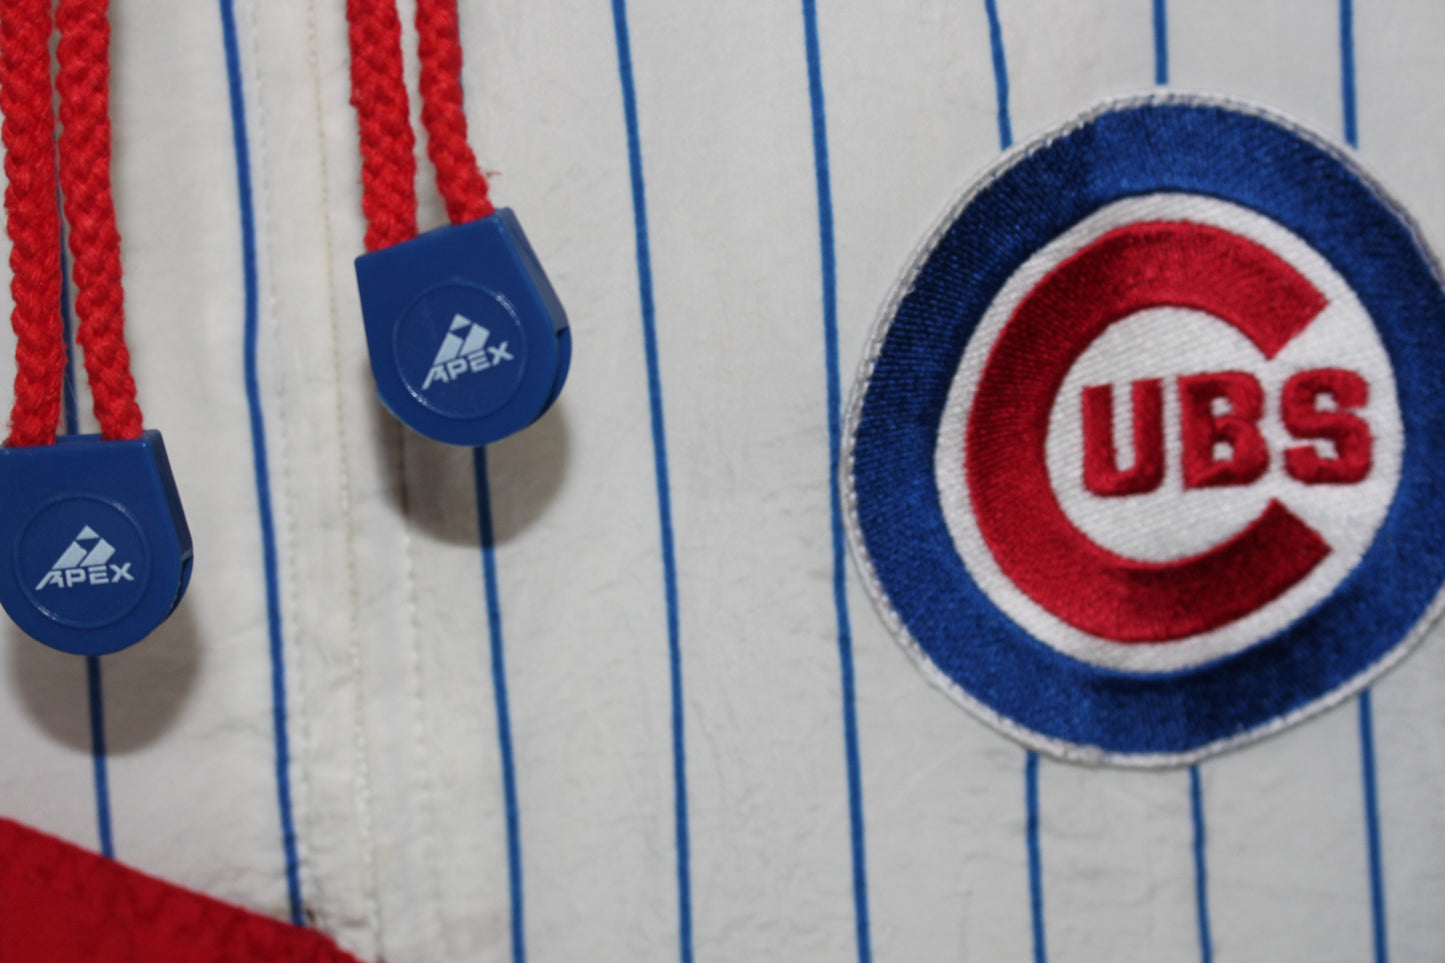 Chicago Cubs Apex One (L)